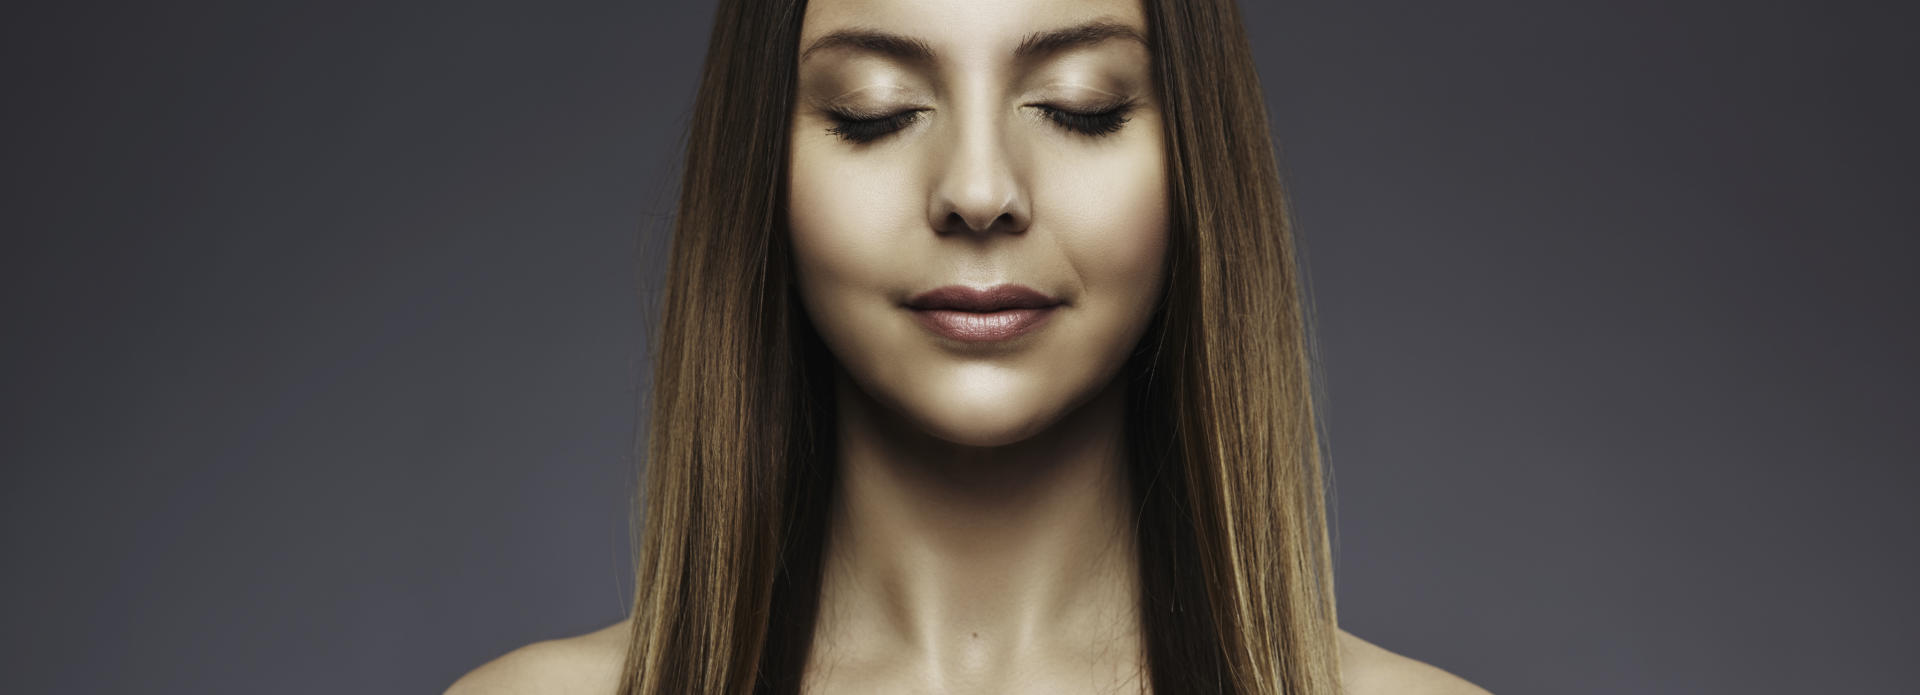 Face of a young-looking woman after cosmetic facial filler treatment.